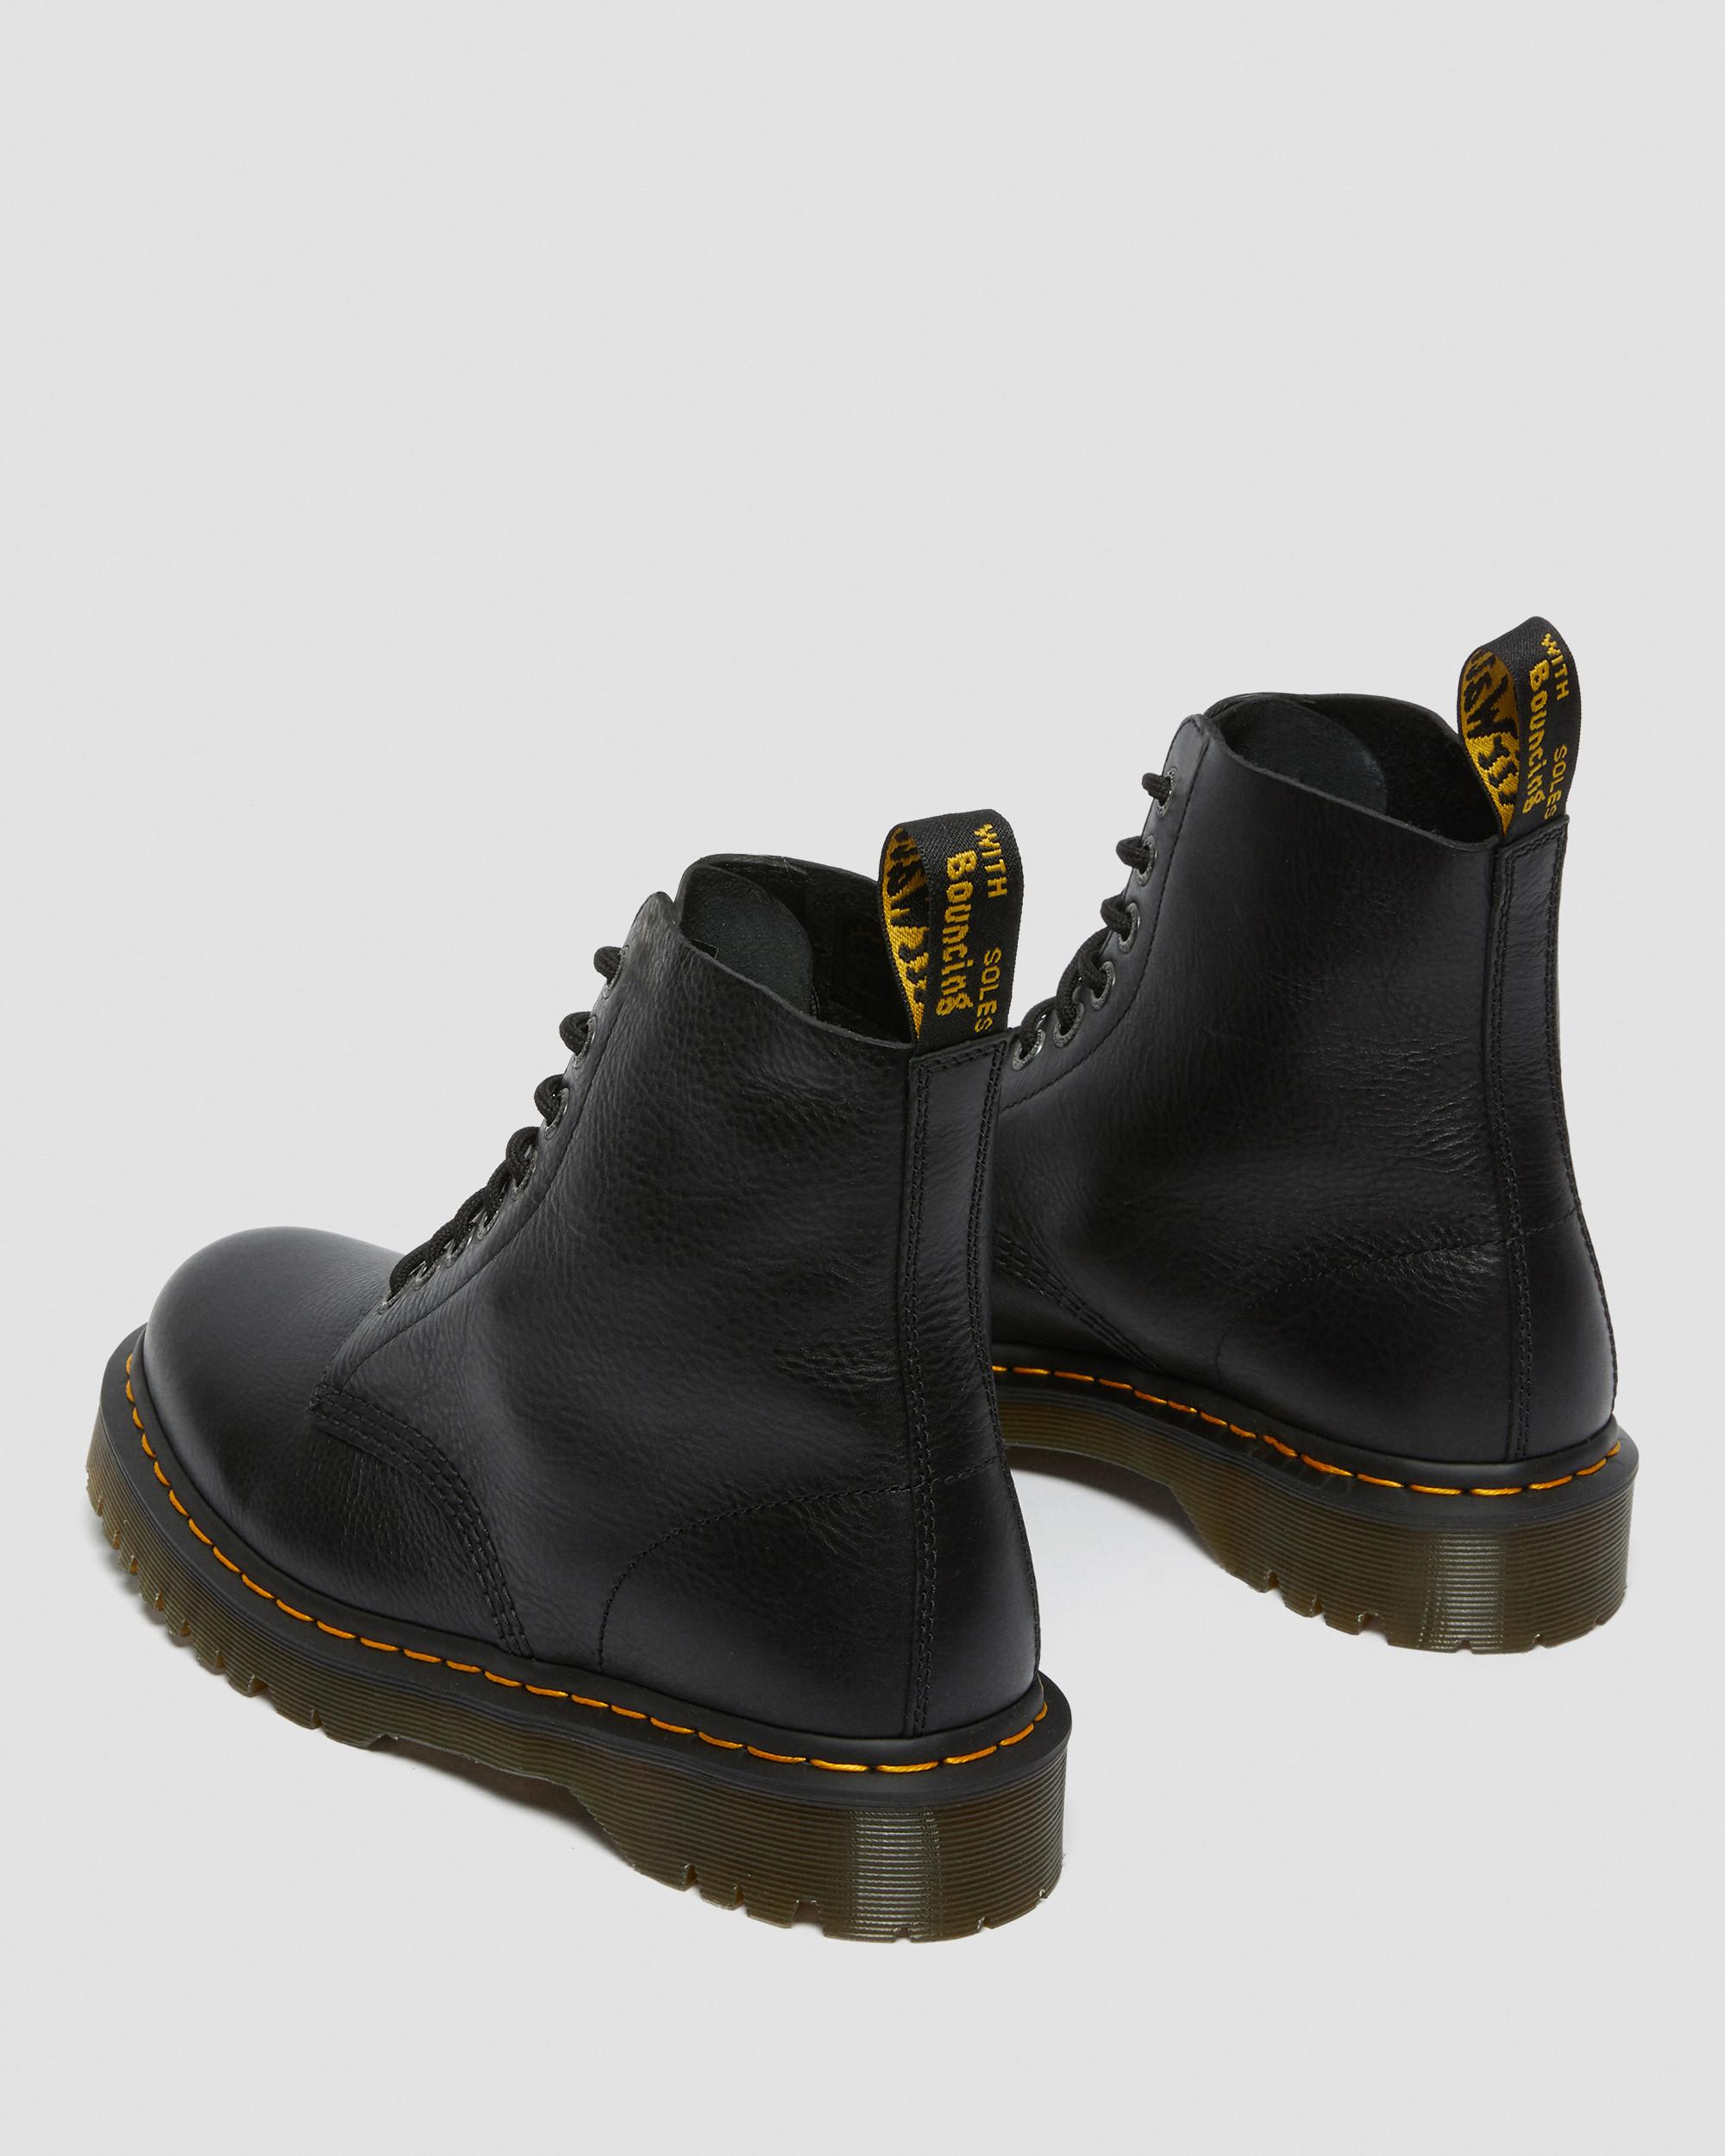 1460 Pascal Bex Pisa Leather Lace Up -maiharit1460 Pascal Bex Pisa Leather Lace Up -maiharit Dr. Martens